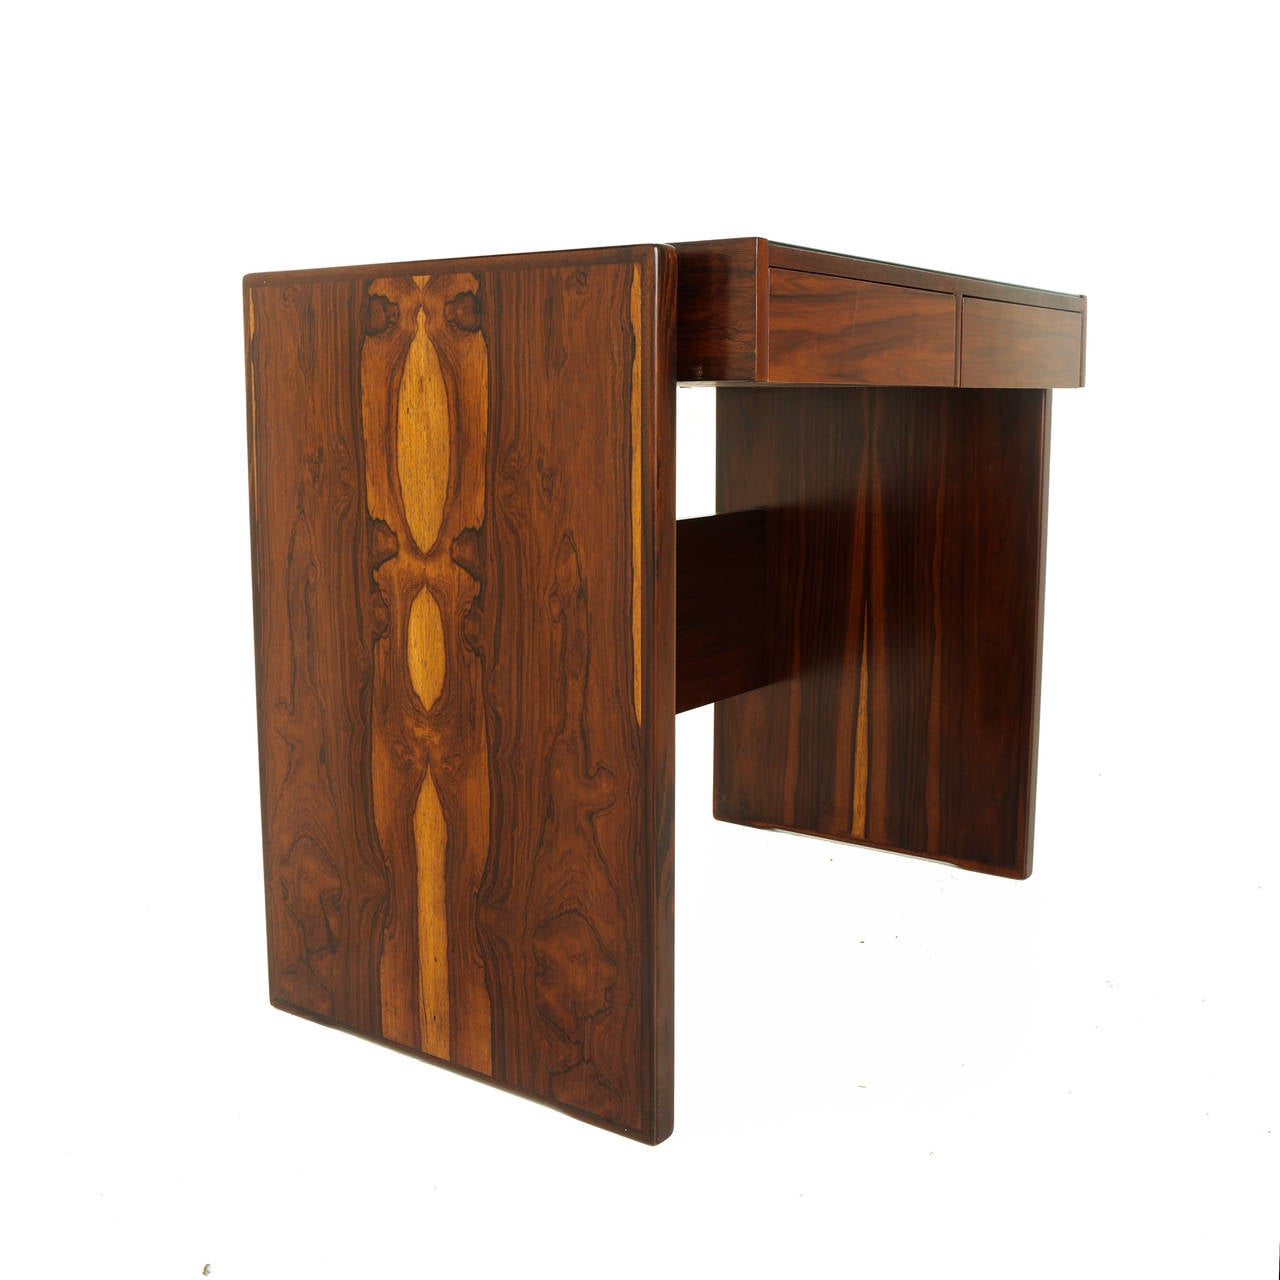 Small Rosewood desk designed by Brazil's Joaquim Tenreiro with glass top and two drawers. This desk came from the Bloch, Editores headquarters, a building designed by Oscar Niemeyer and with interiors furnished by Sergio Rodrigues and Joaquim